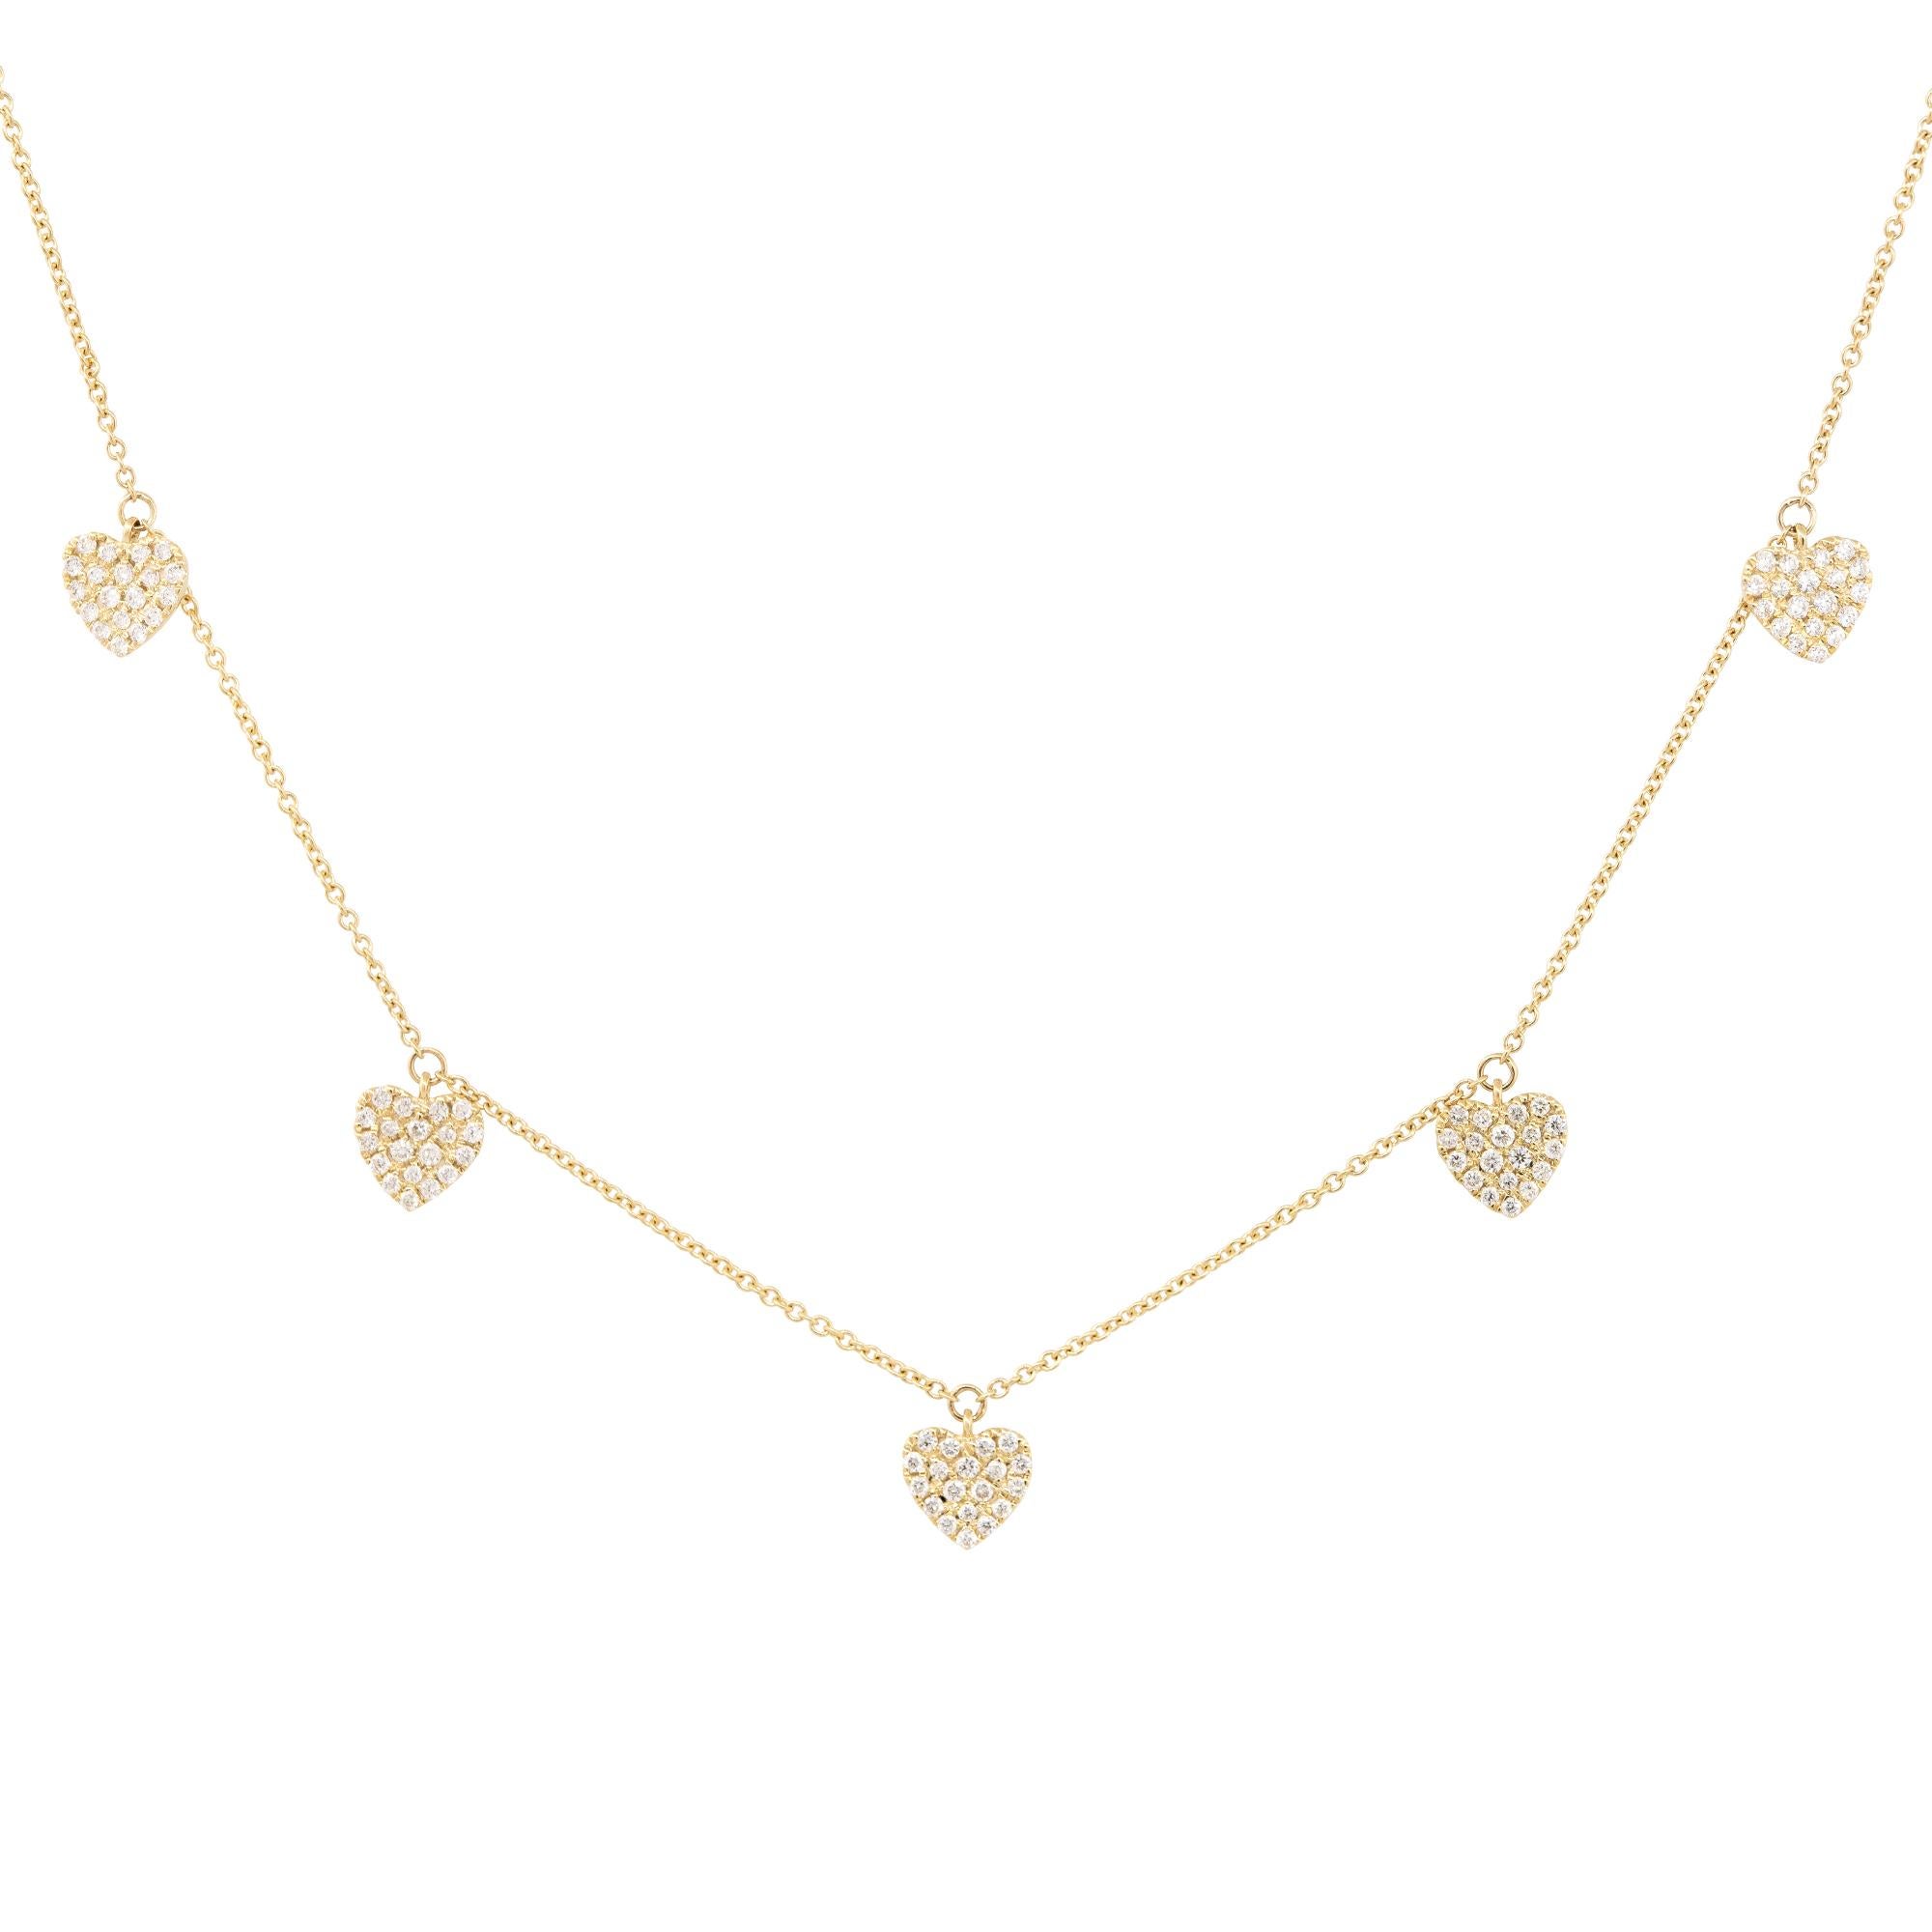 Round Cut 0.49 Carat Pave Diamond Heart 5 Station Necklace 14 Karat in Stock For Sale